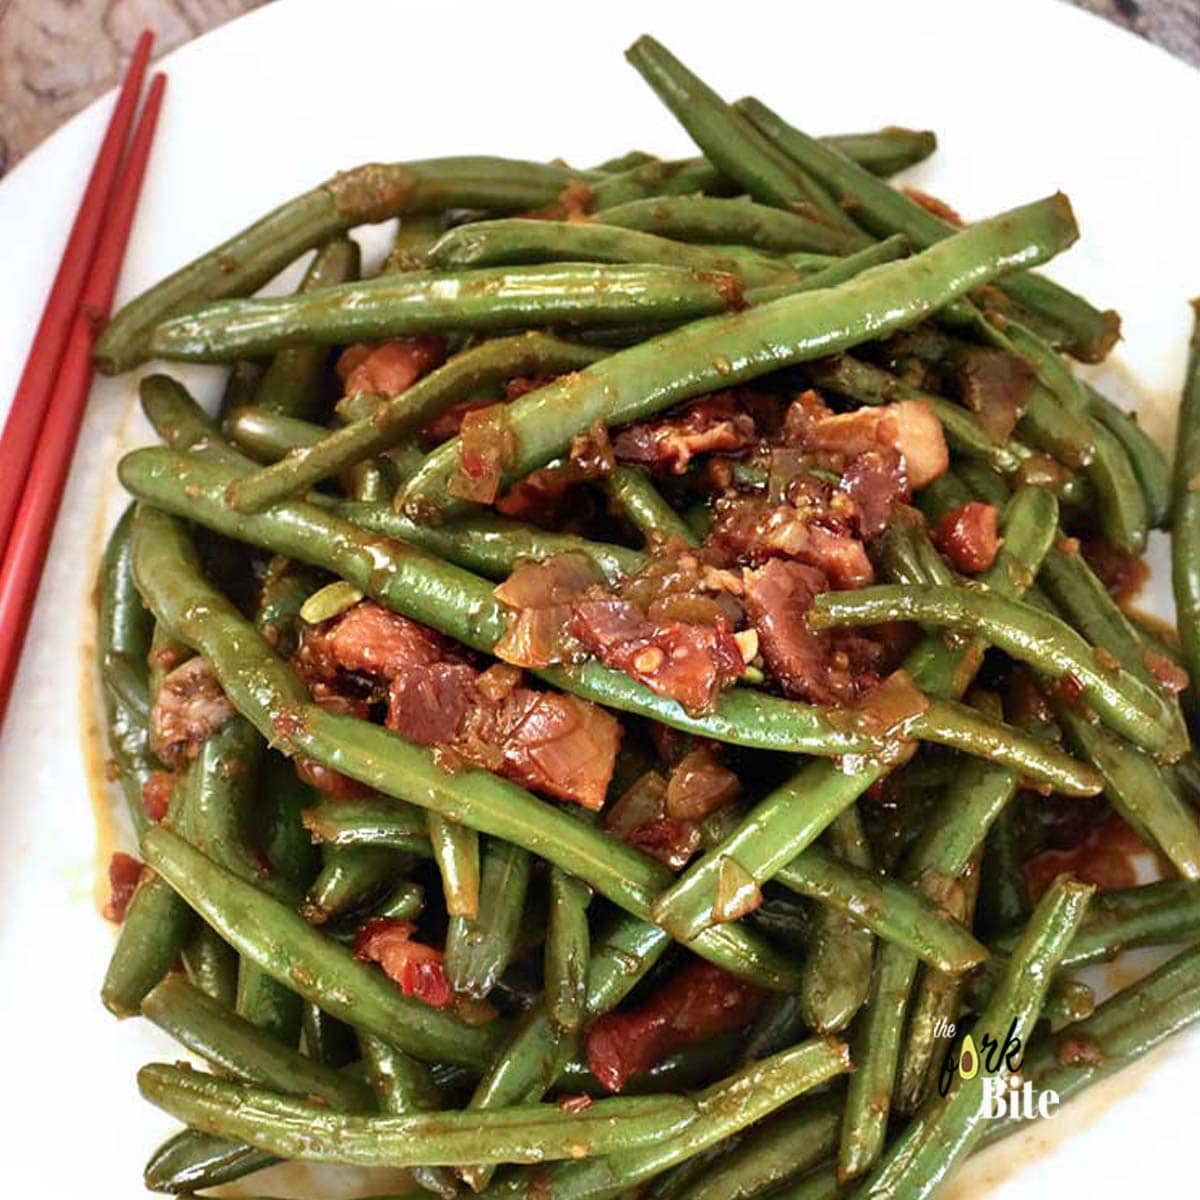 These Stir Fry Green Beans are so easy to make and so addictively yum. Loaded with chilies, crispy bacon, and garlic which is a great takeout fakeout.